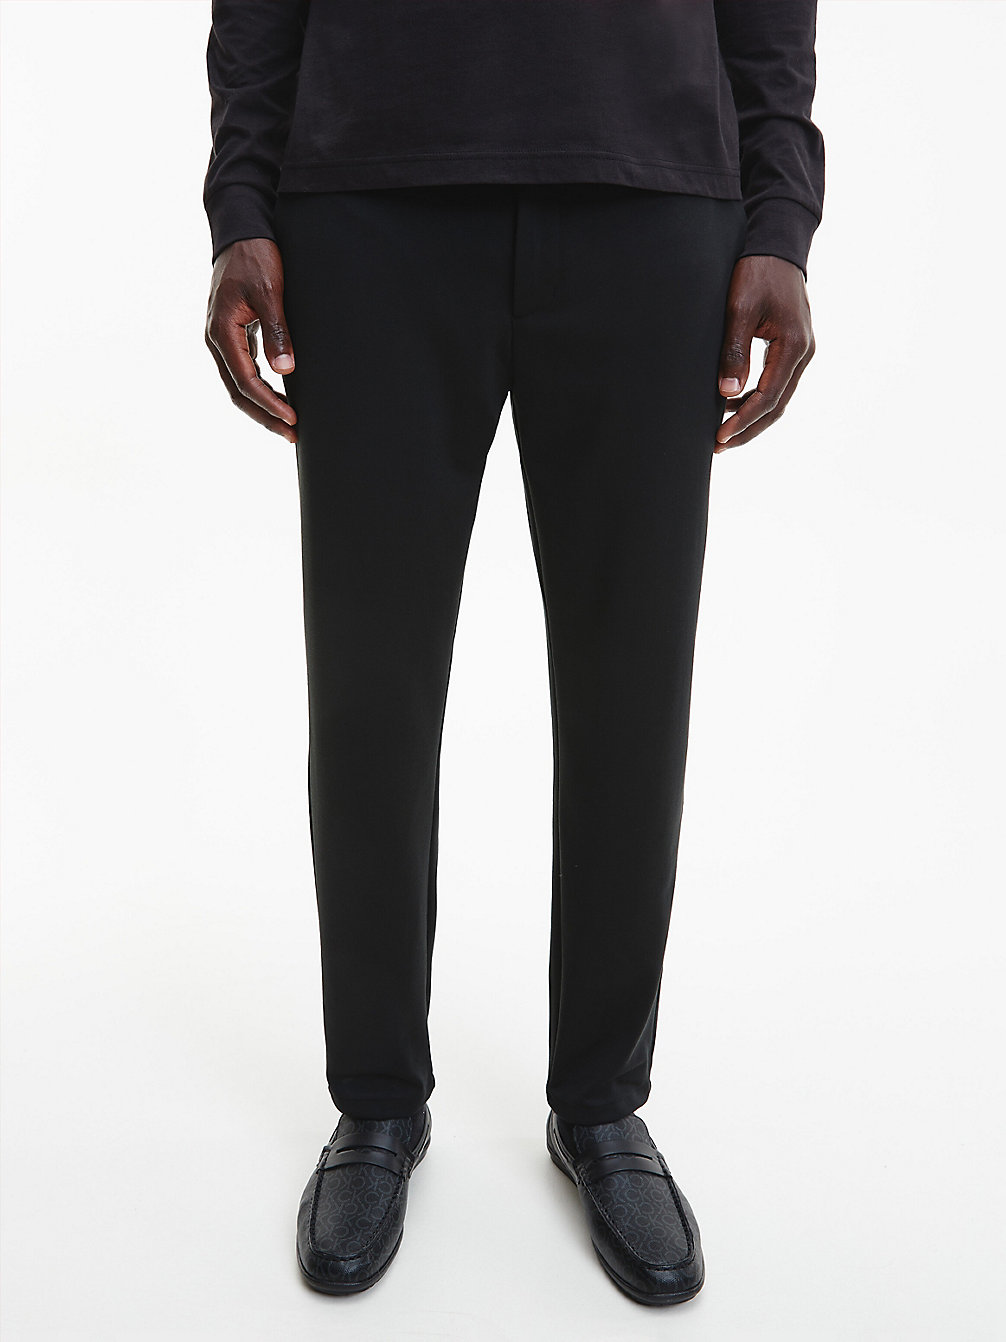 CK BLACK Recycled Polyester Tapered Trousers undefined men Calvin Klein